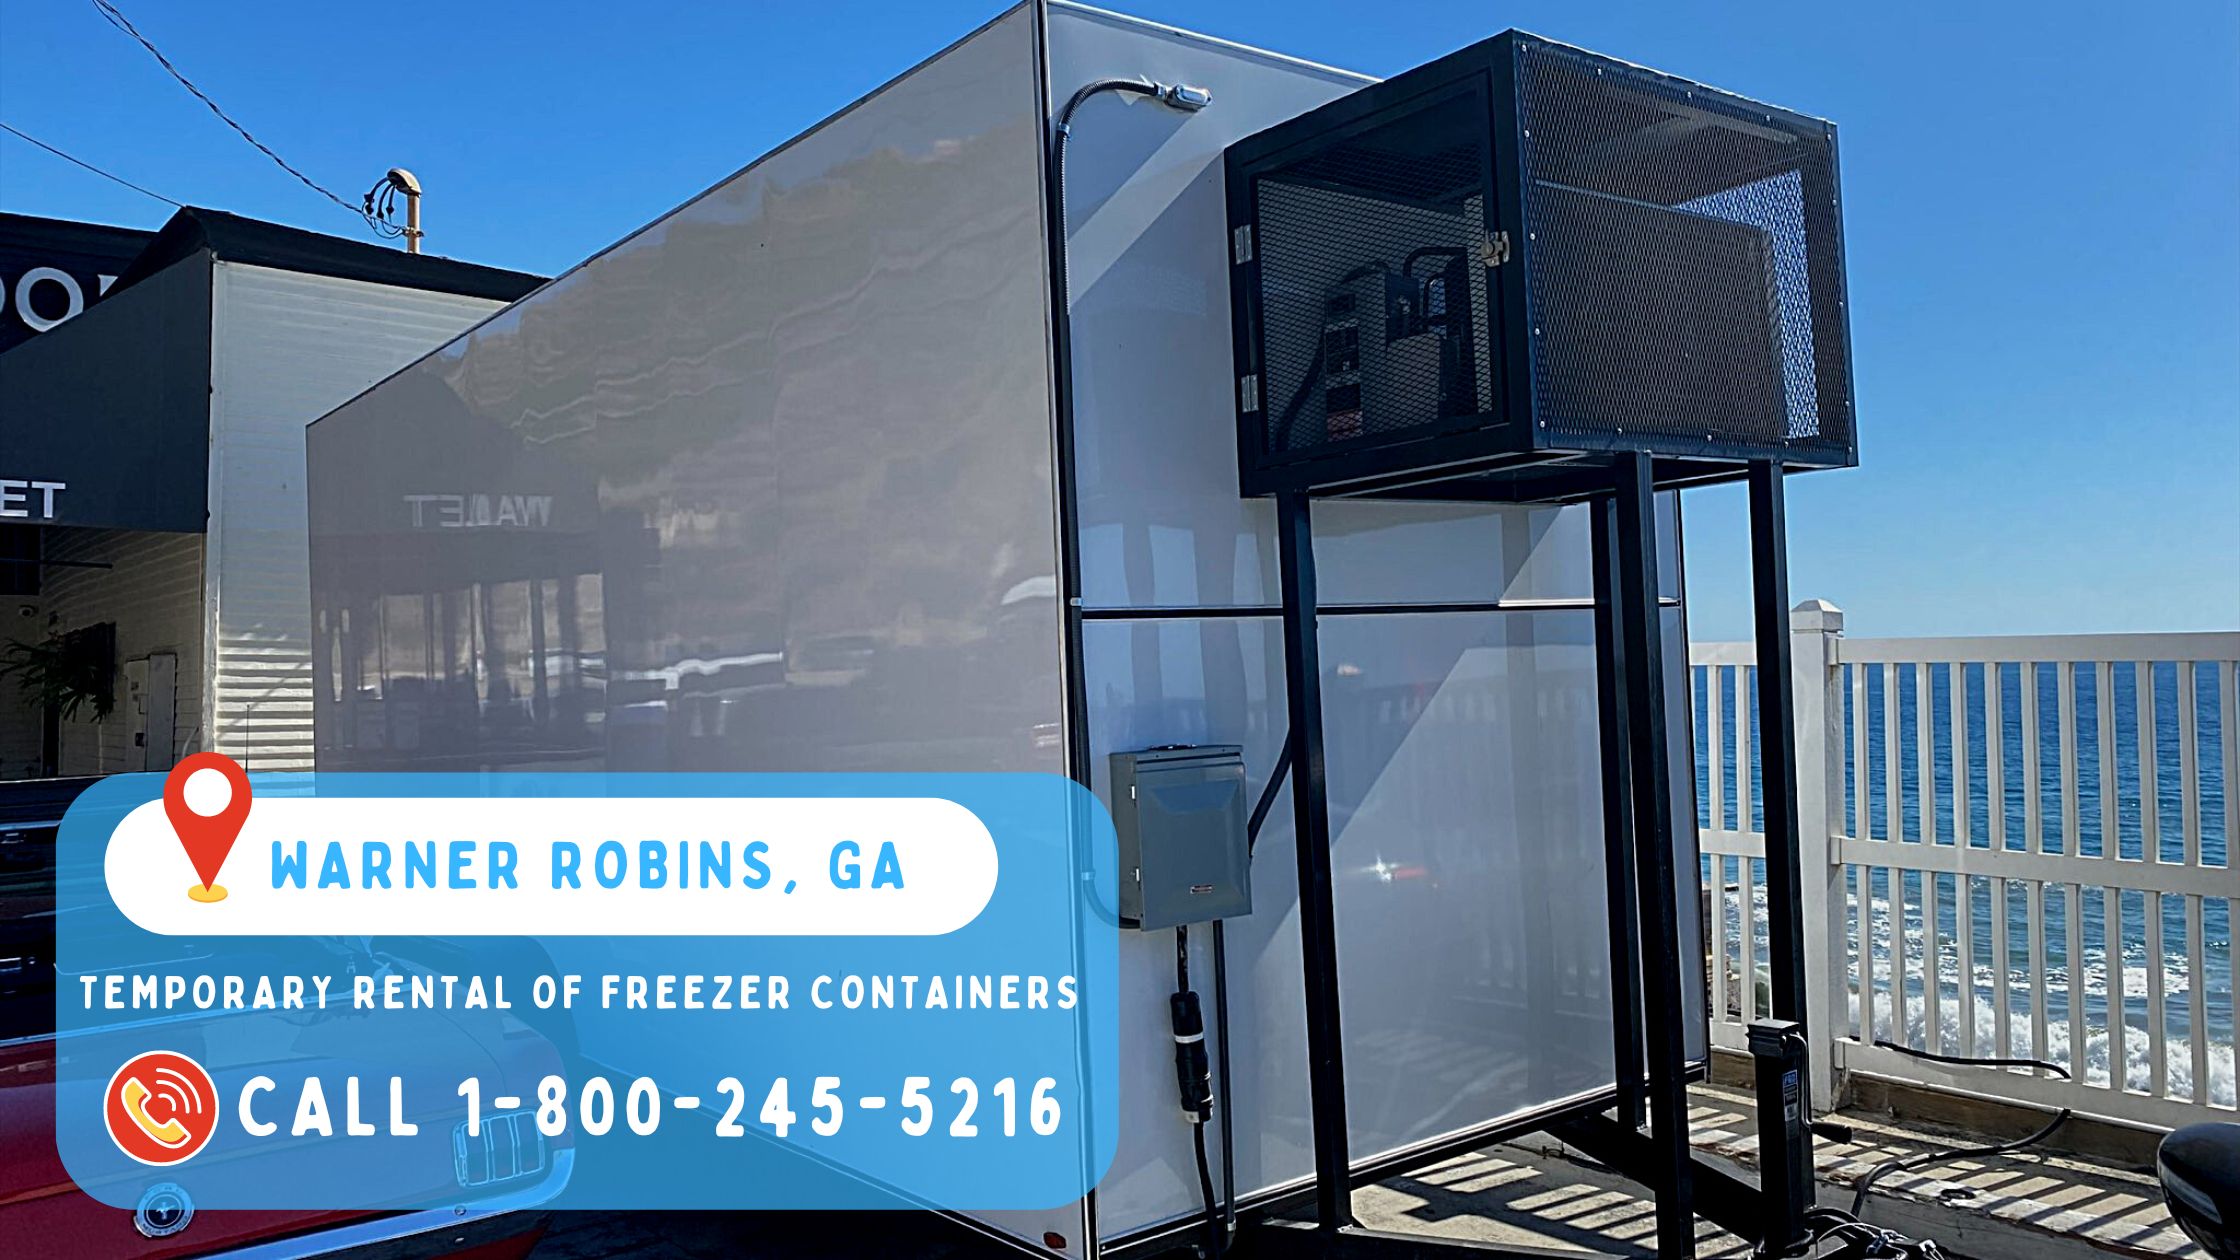 Temporary rental of freezer containers in Warner Robins